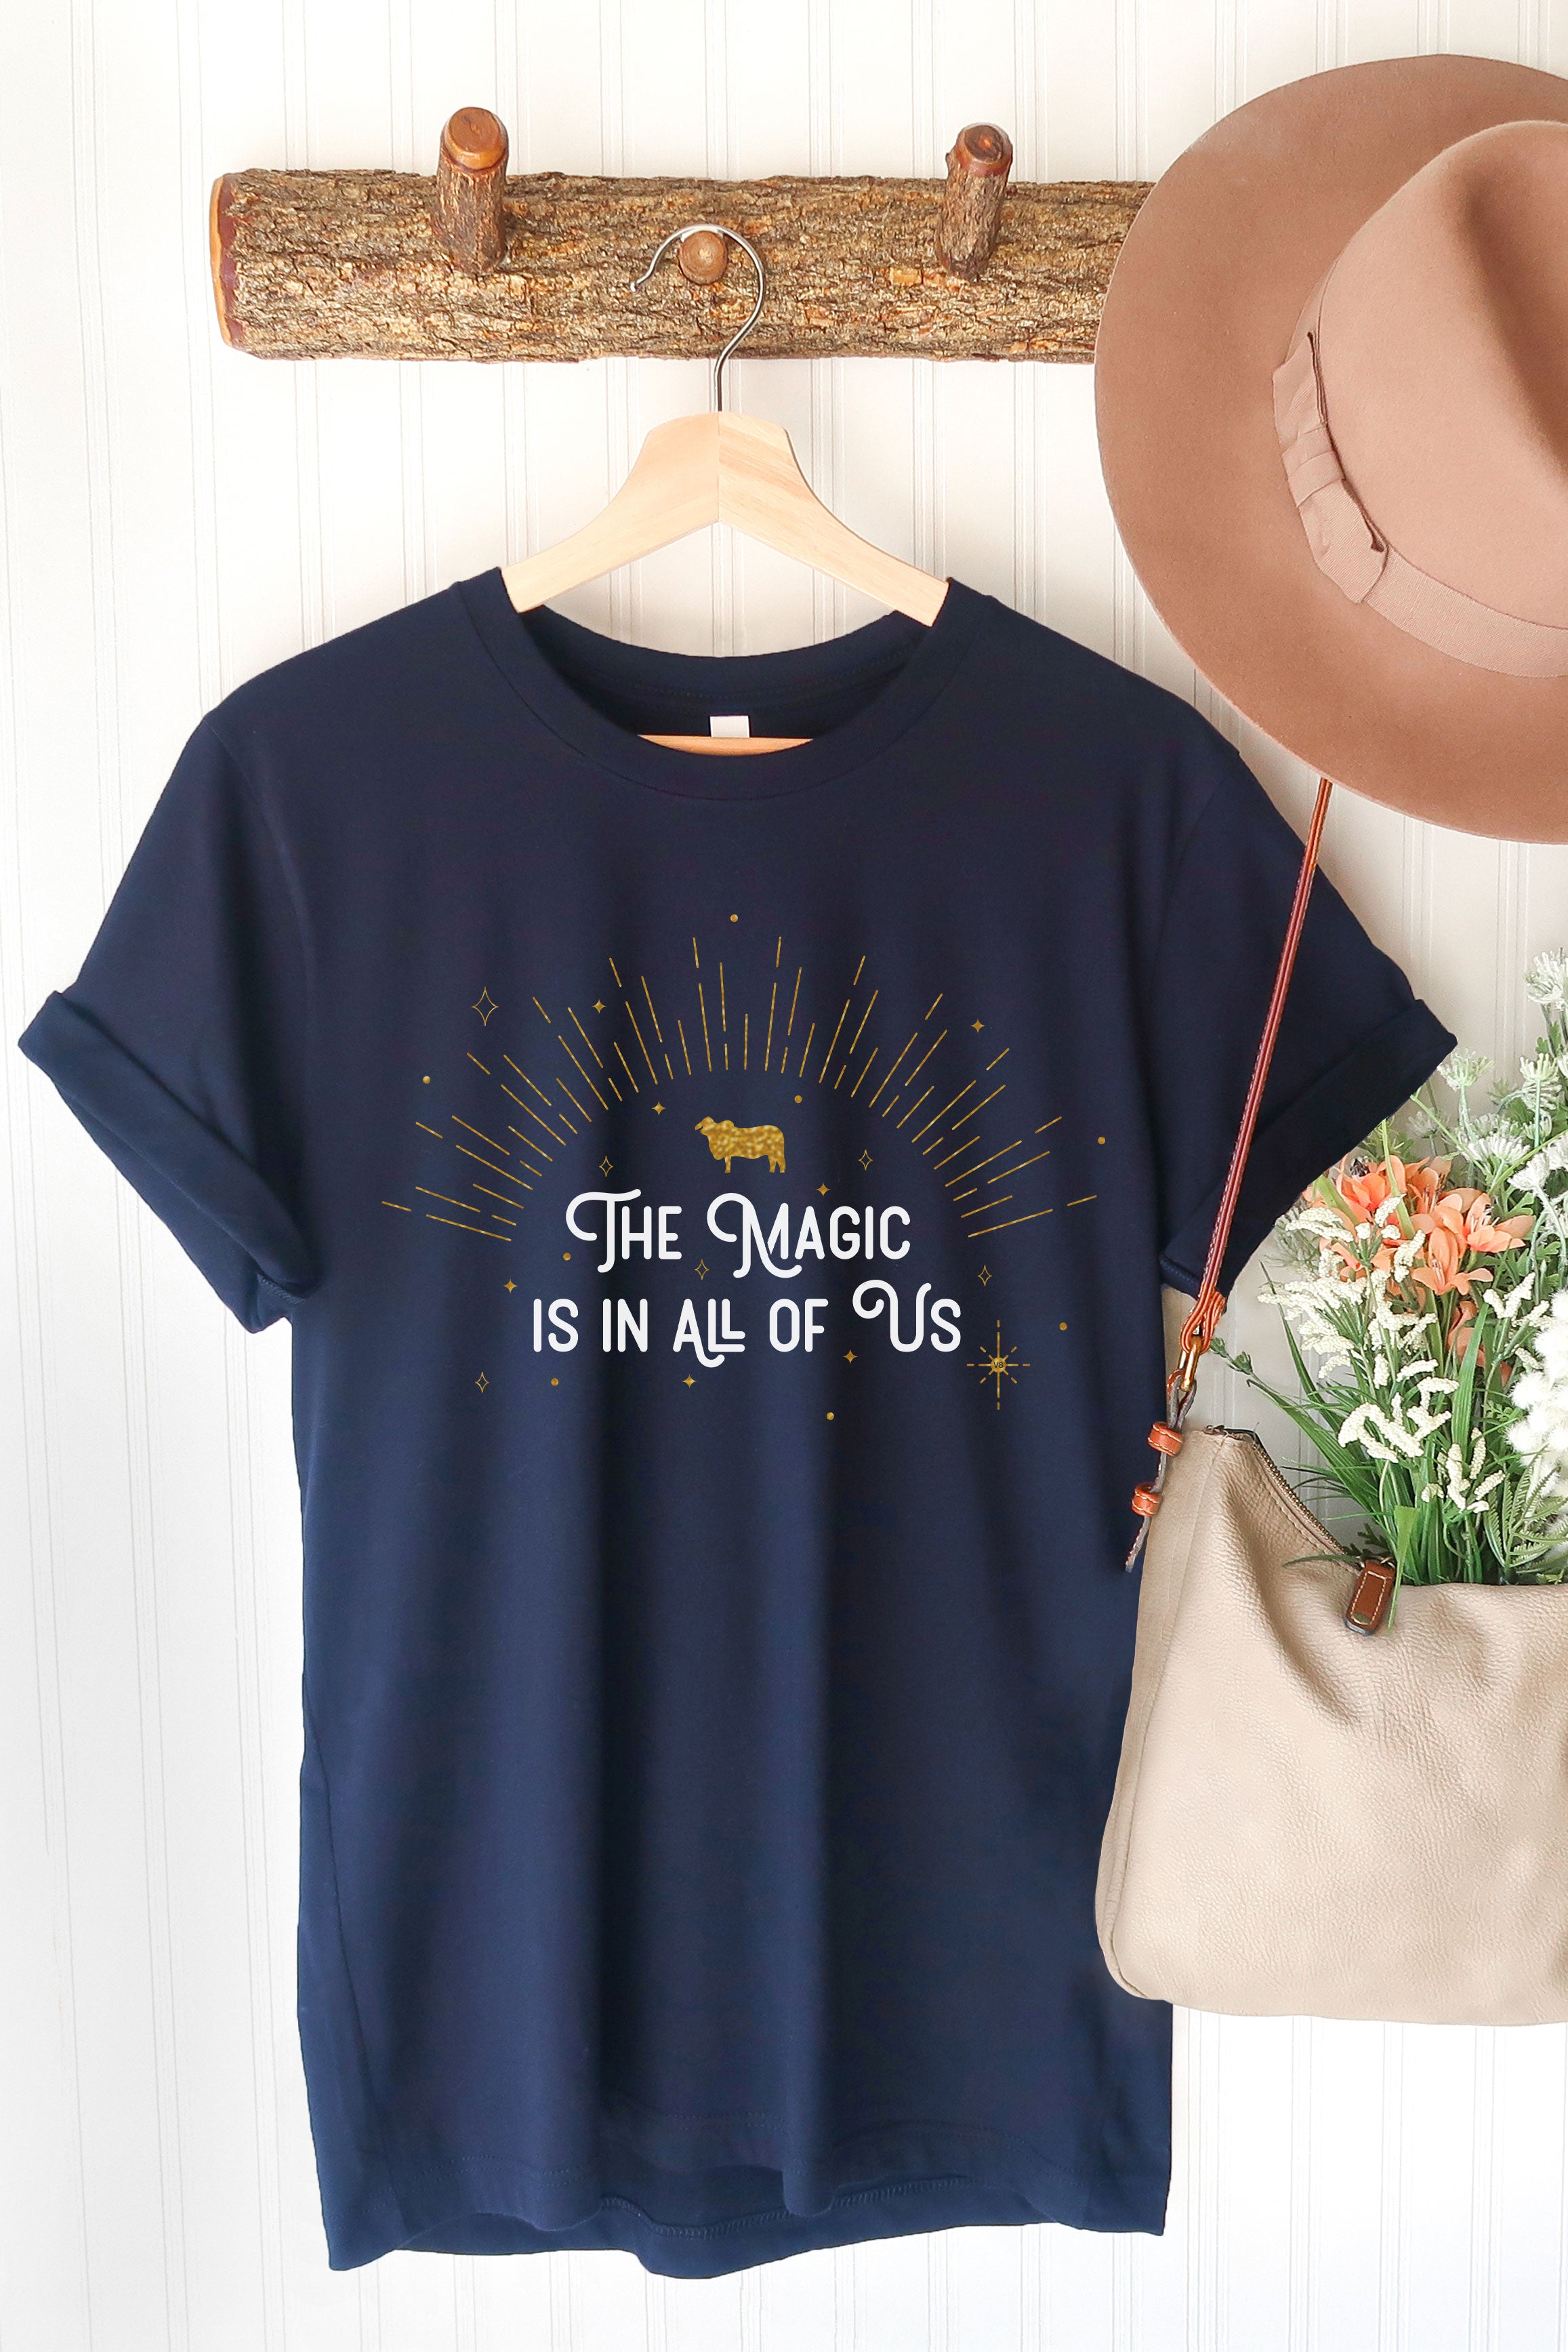 "The Magic Is In All Of Us" V8 Tee